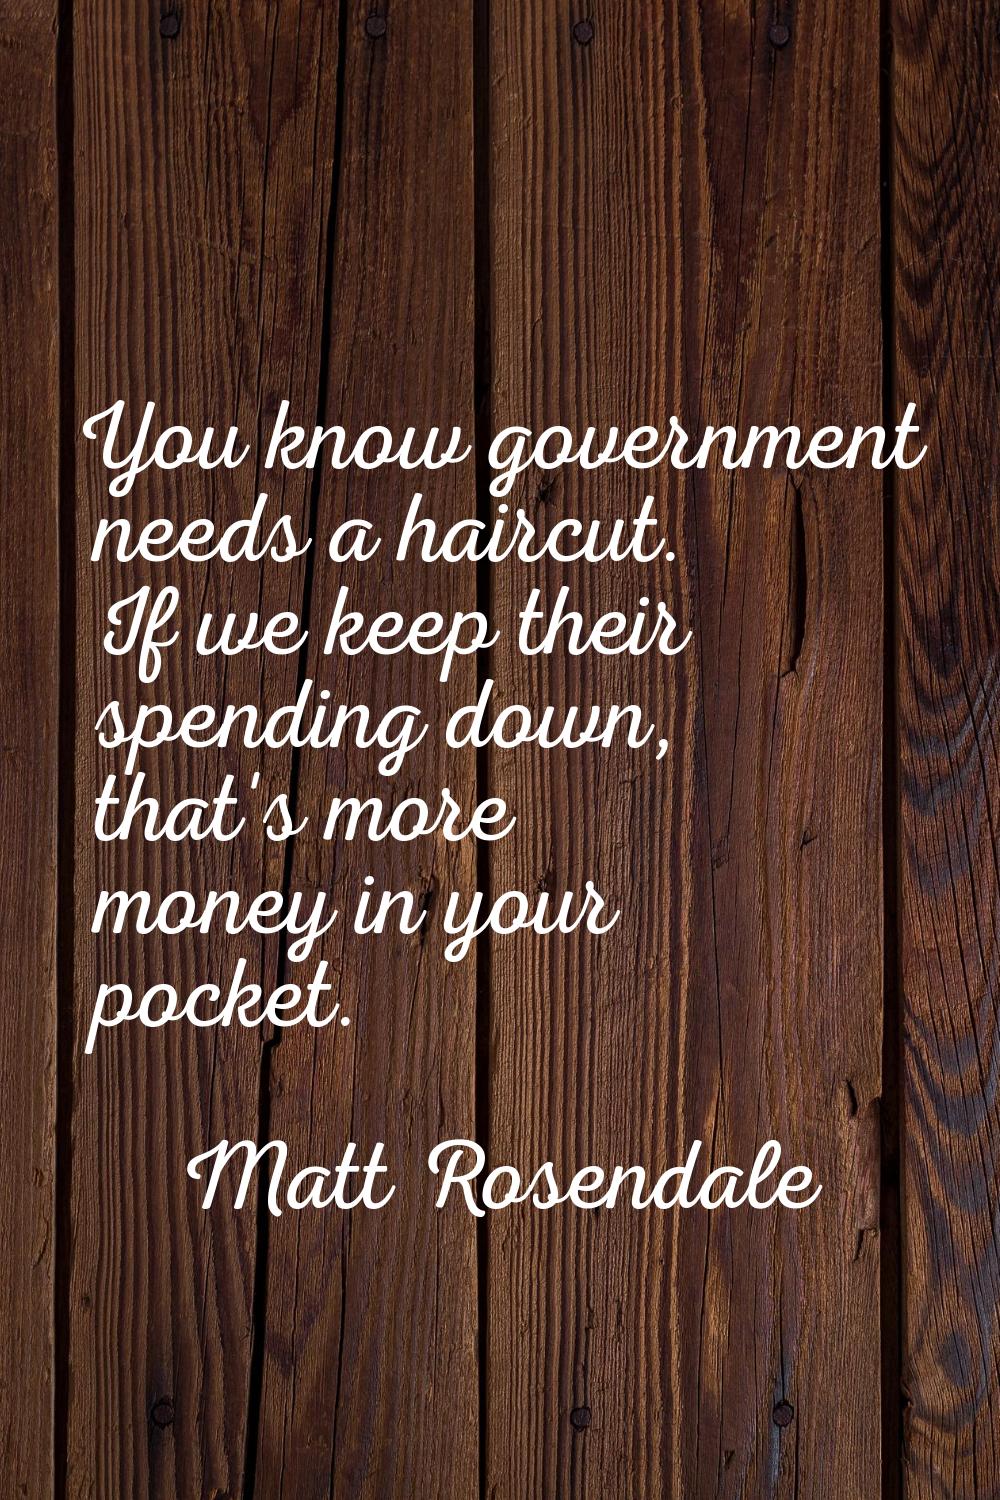 You know government needs a haircut. If we keep their spending down, that's more money in your pock